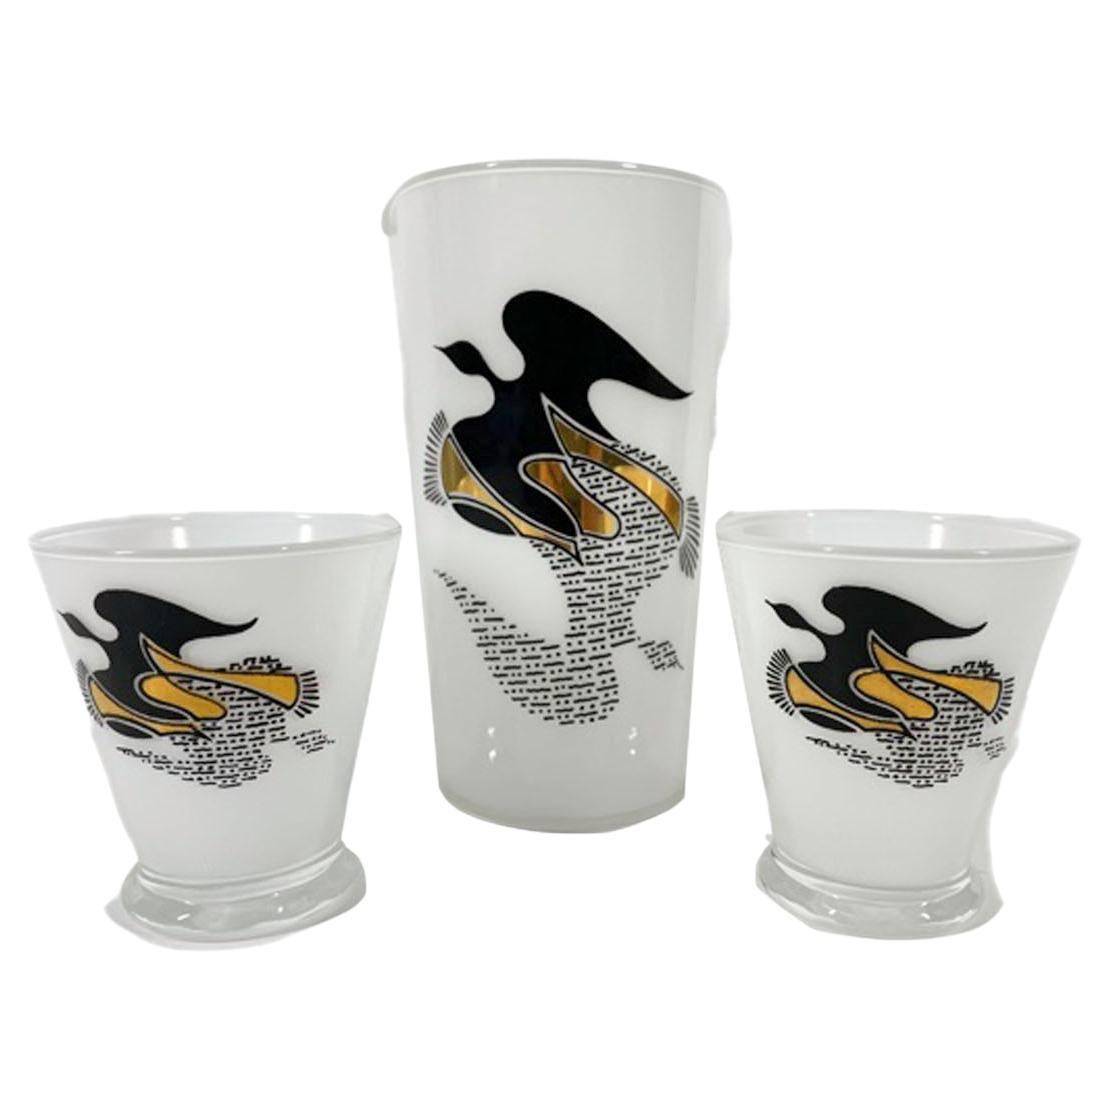 Mid-Century Modern Three-Piece Cocktail Set with Black & Gold Doves